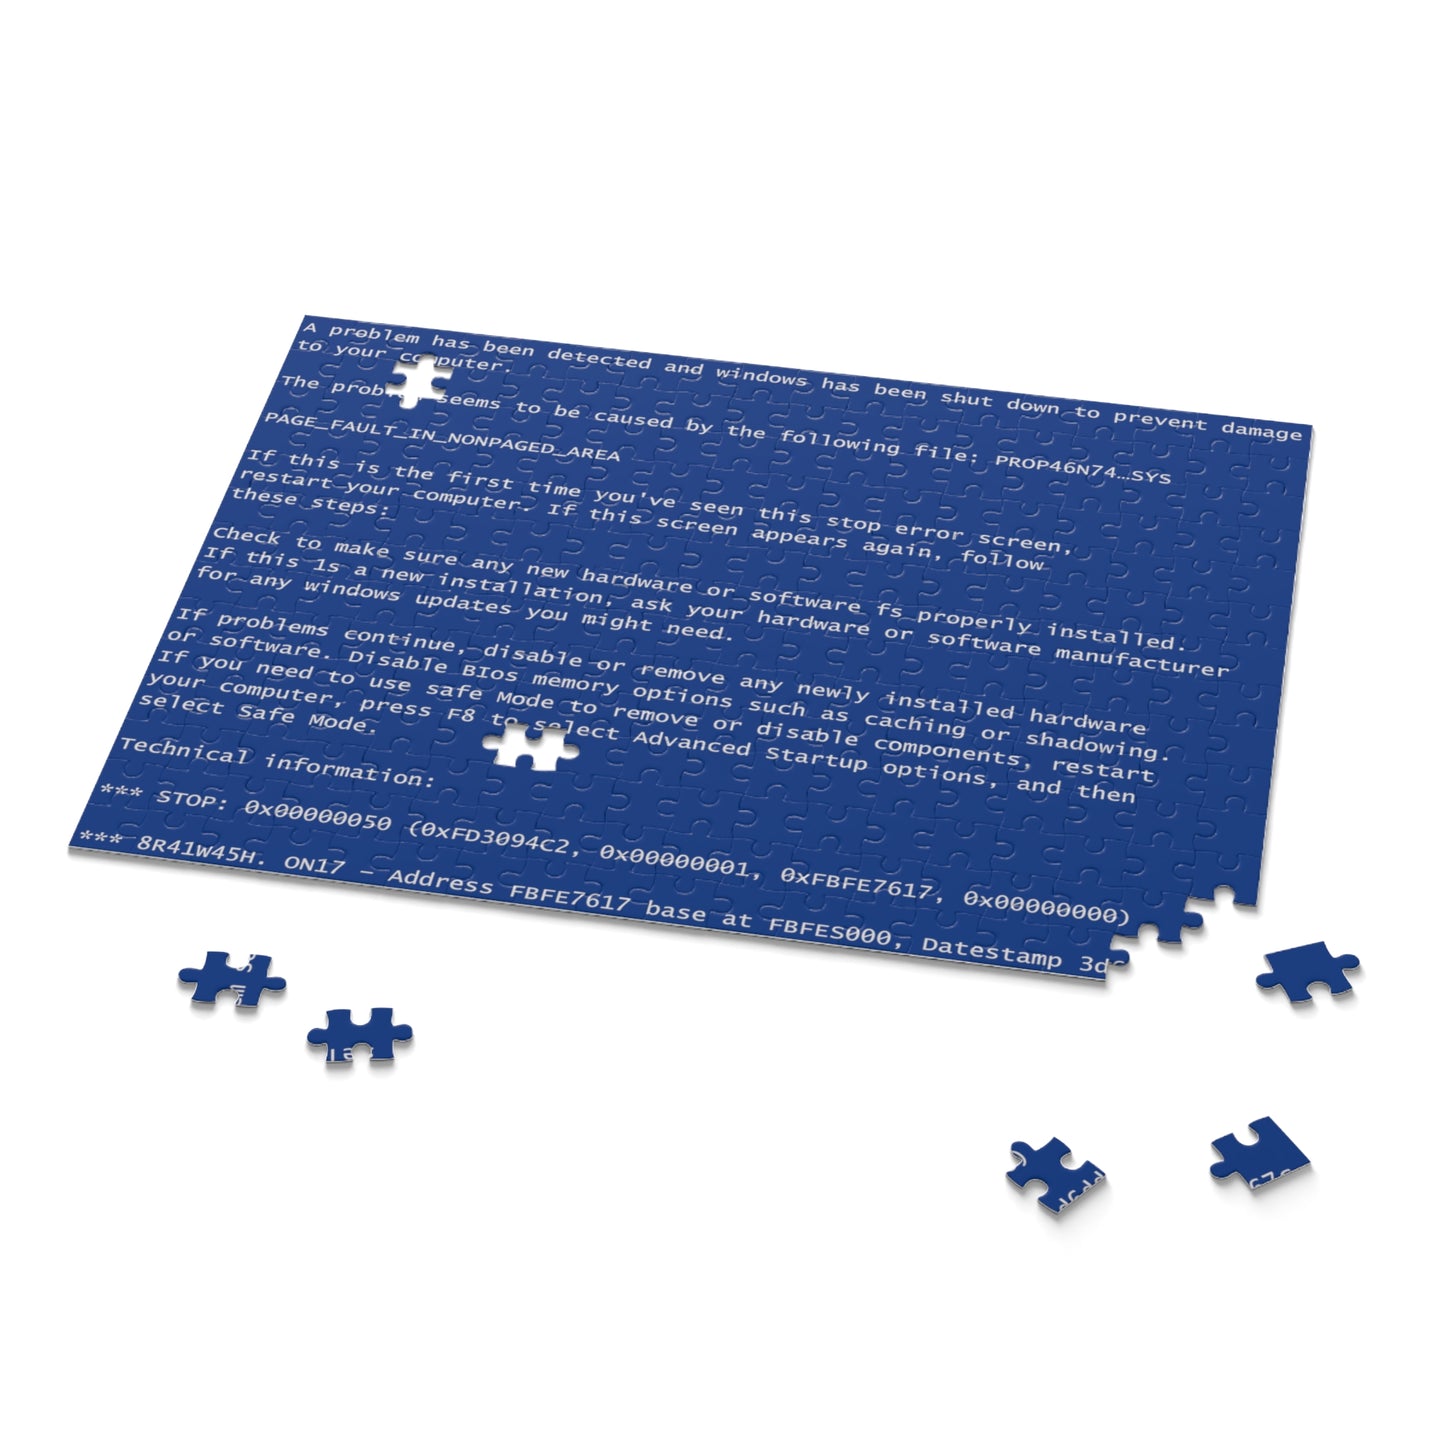 BSoD (Blue Screen of Death) Jigsaw Puzzle